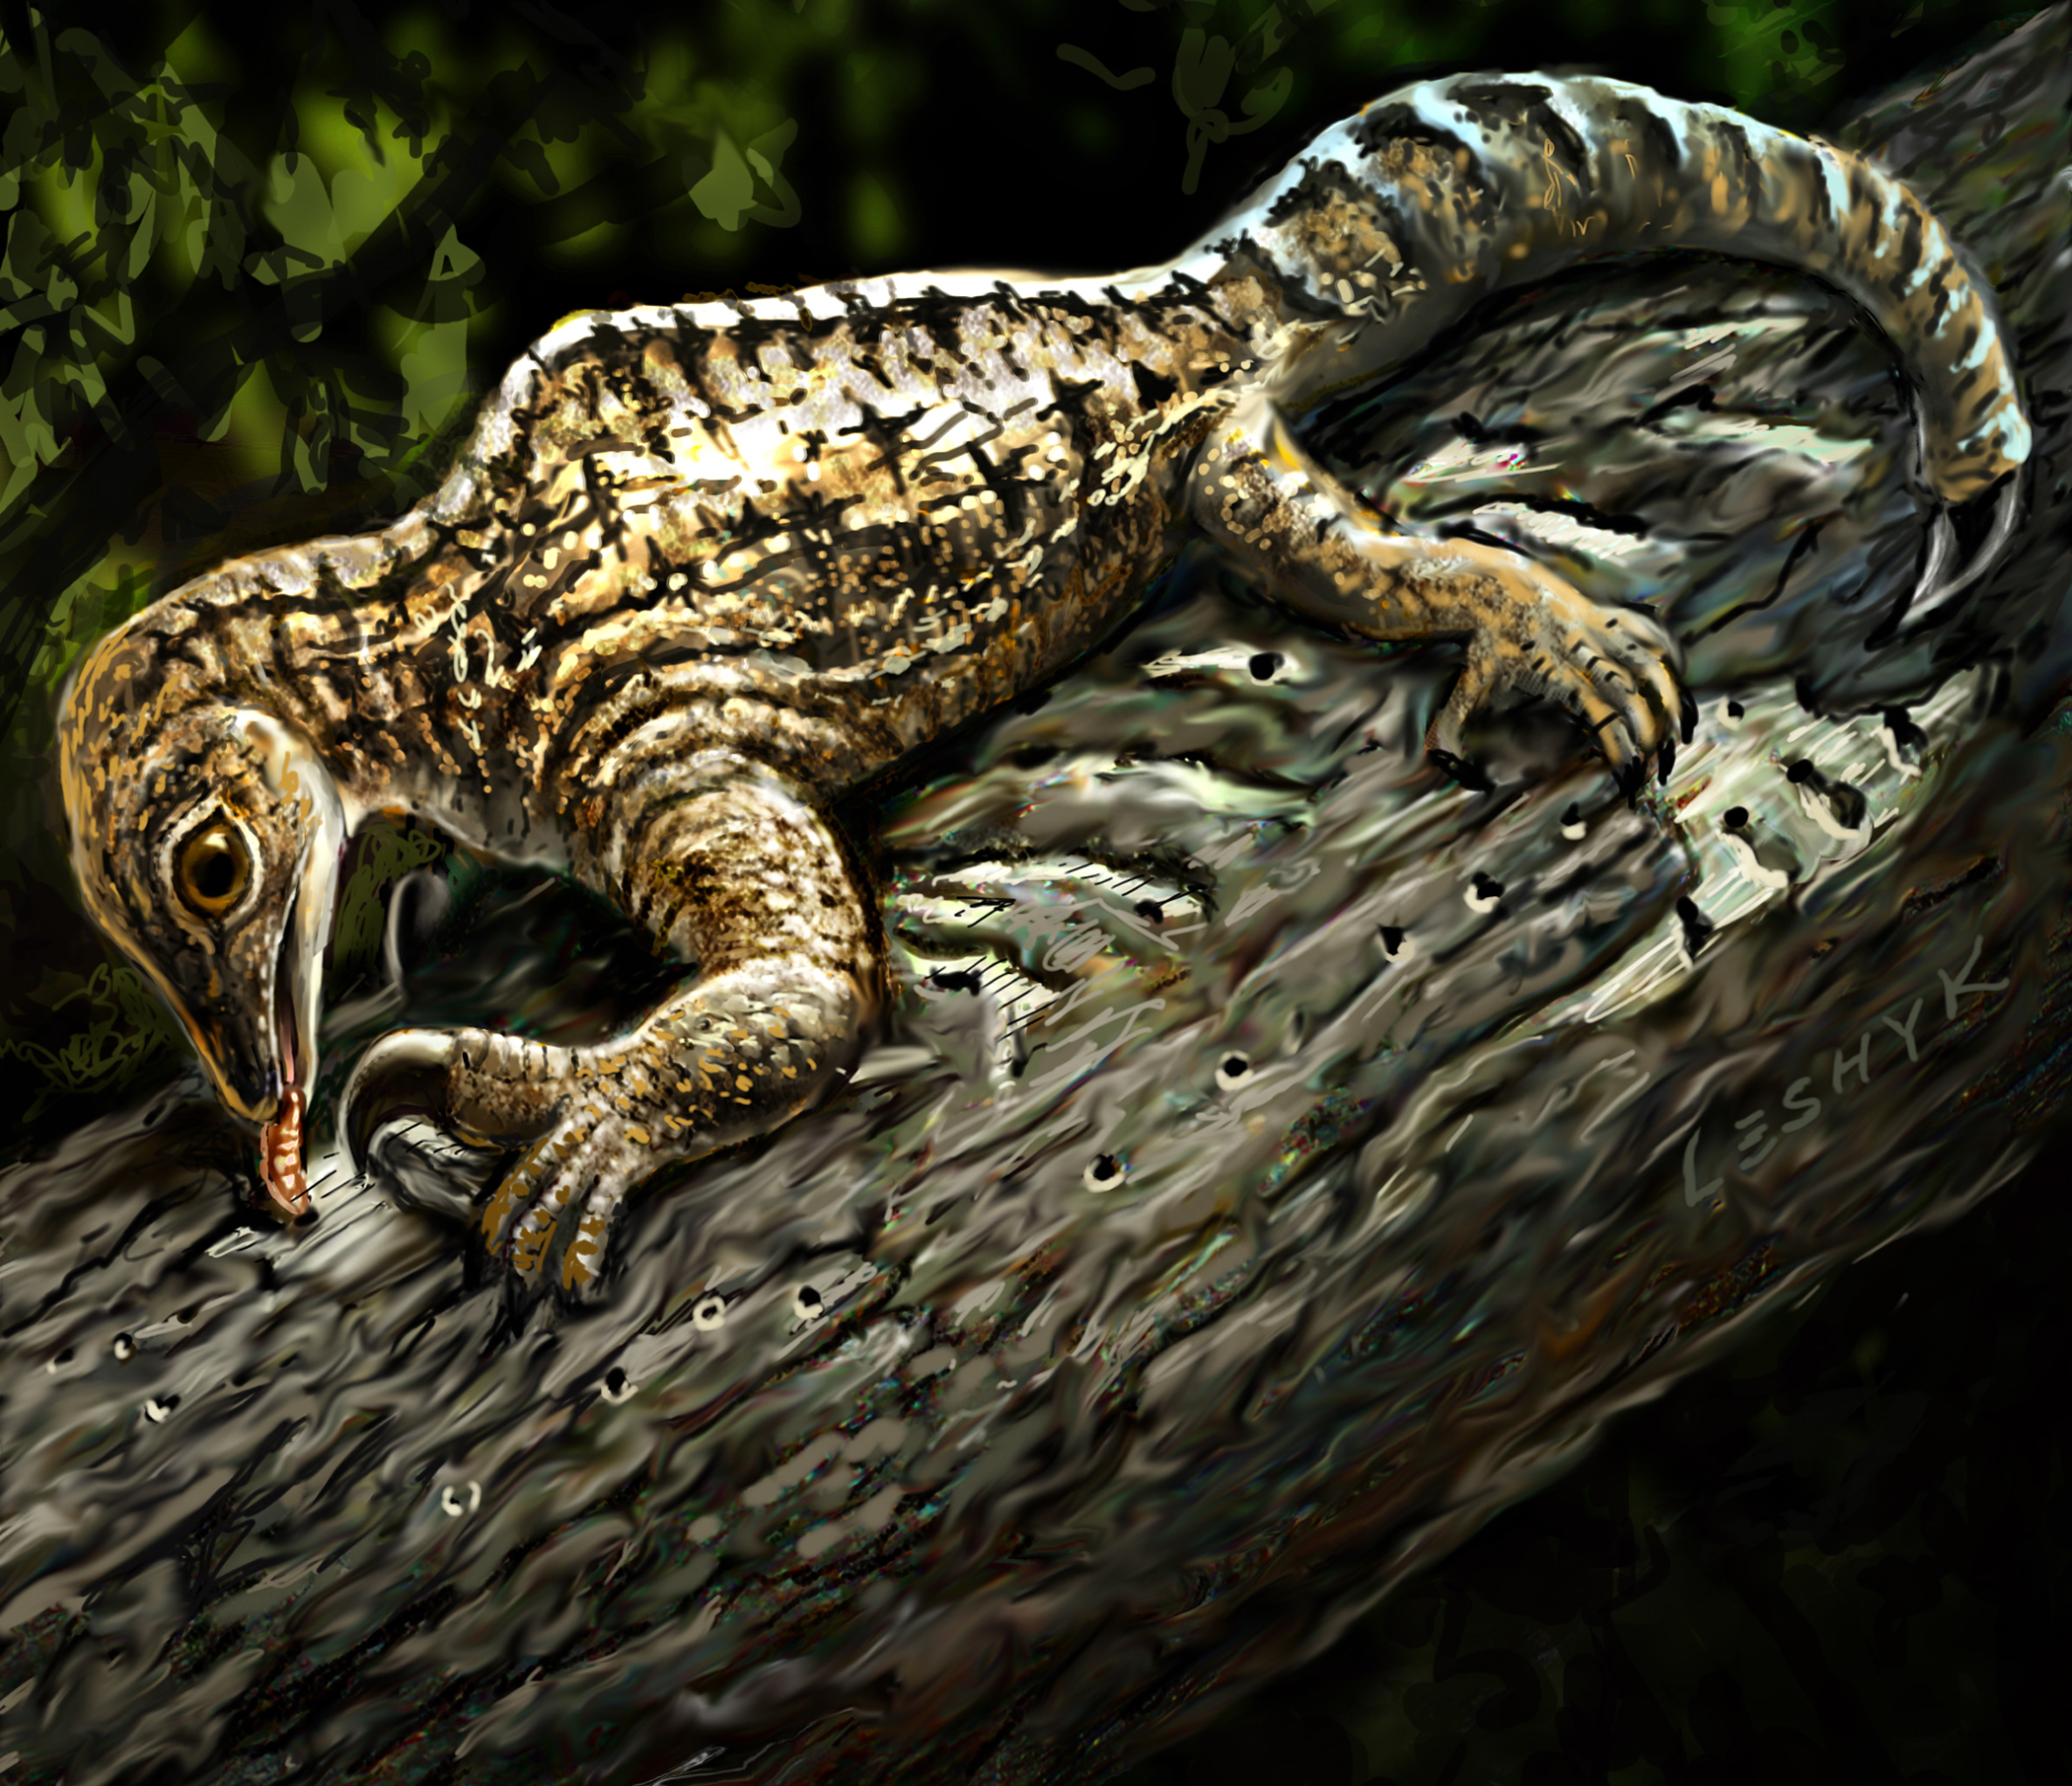 212-Million-Year-Old Reptile Had Anteater-Like Arms